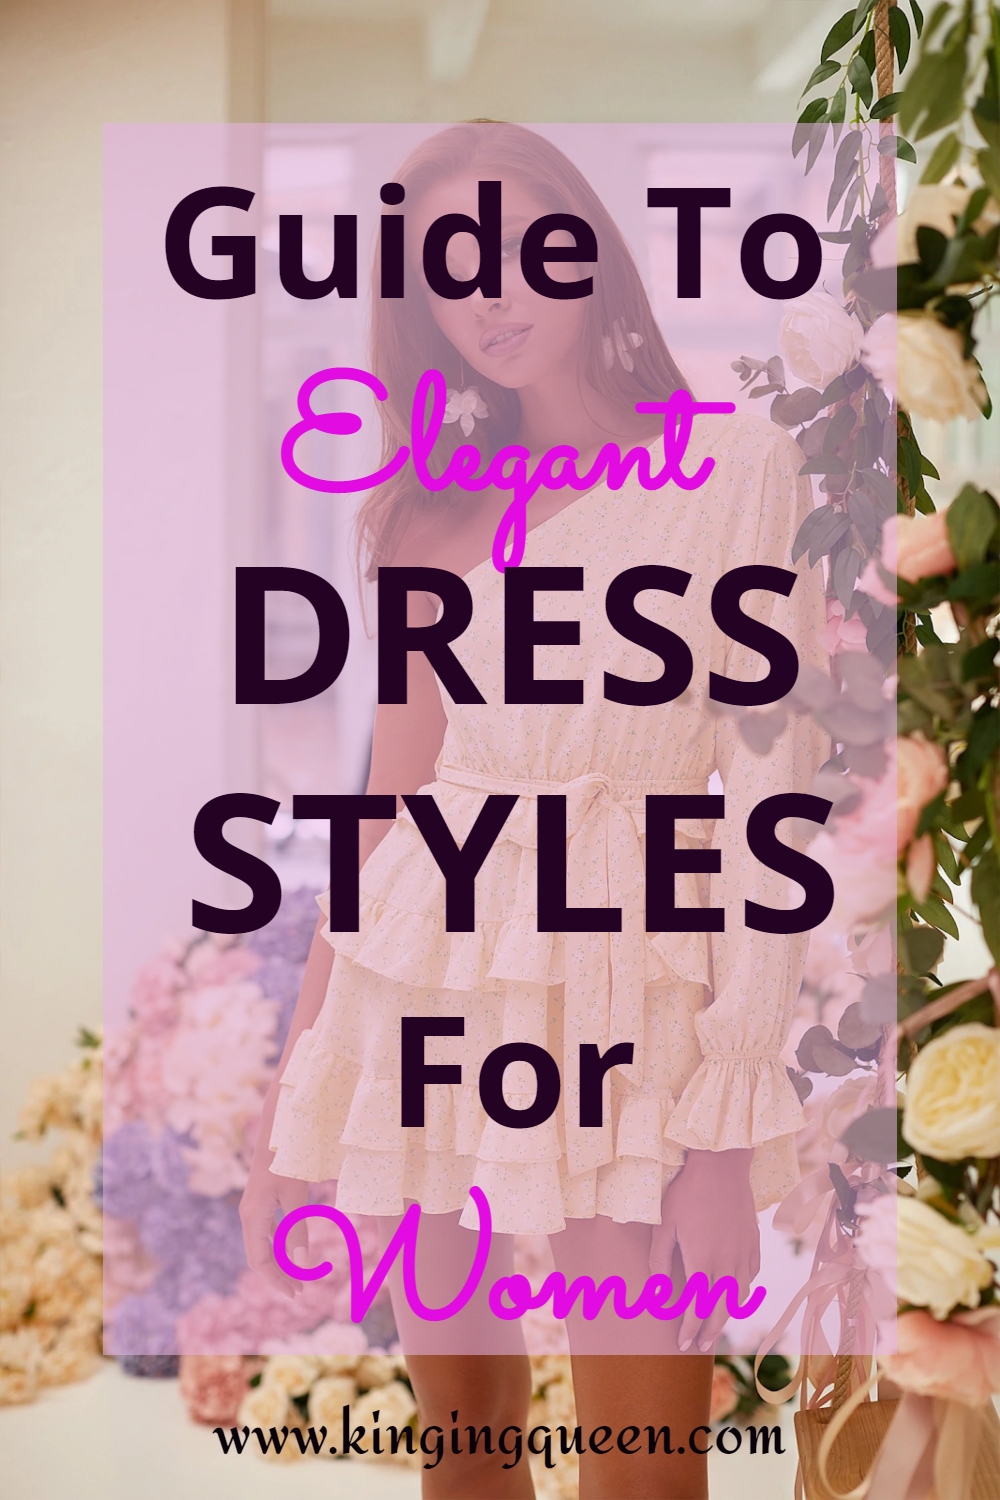 Dress Styles For Women: Dress Styles Every Woman Should Own